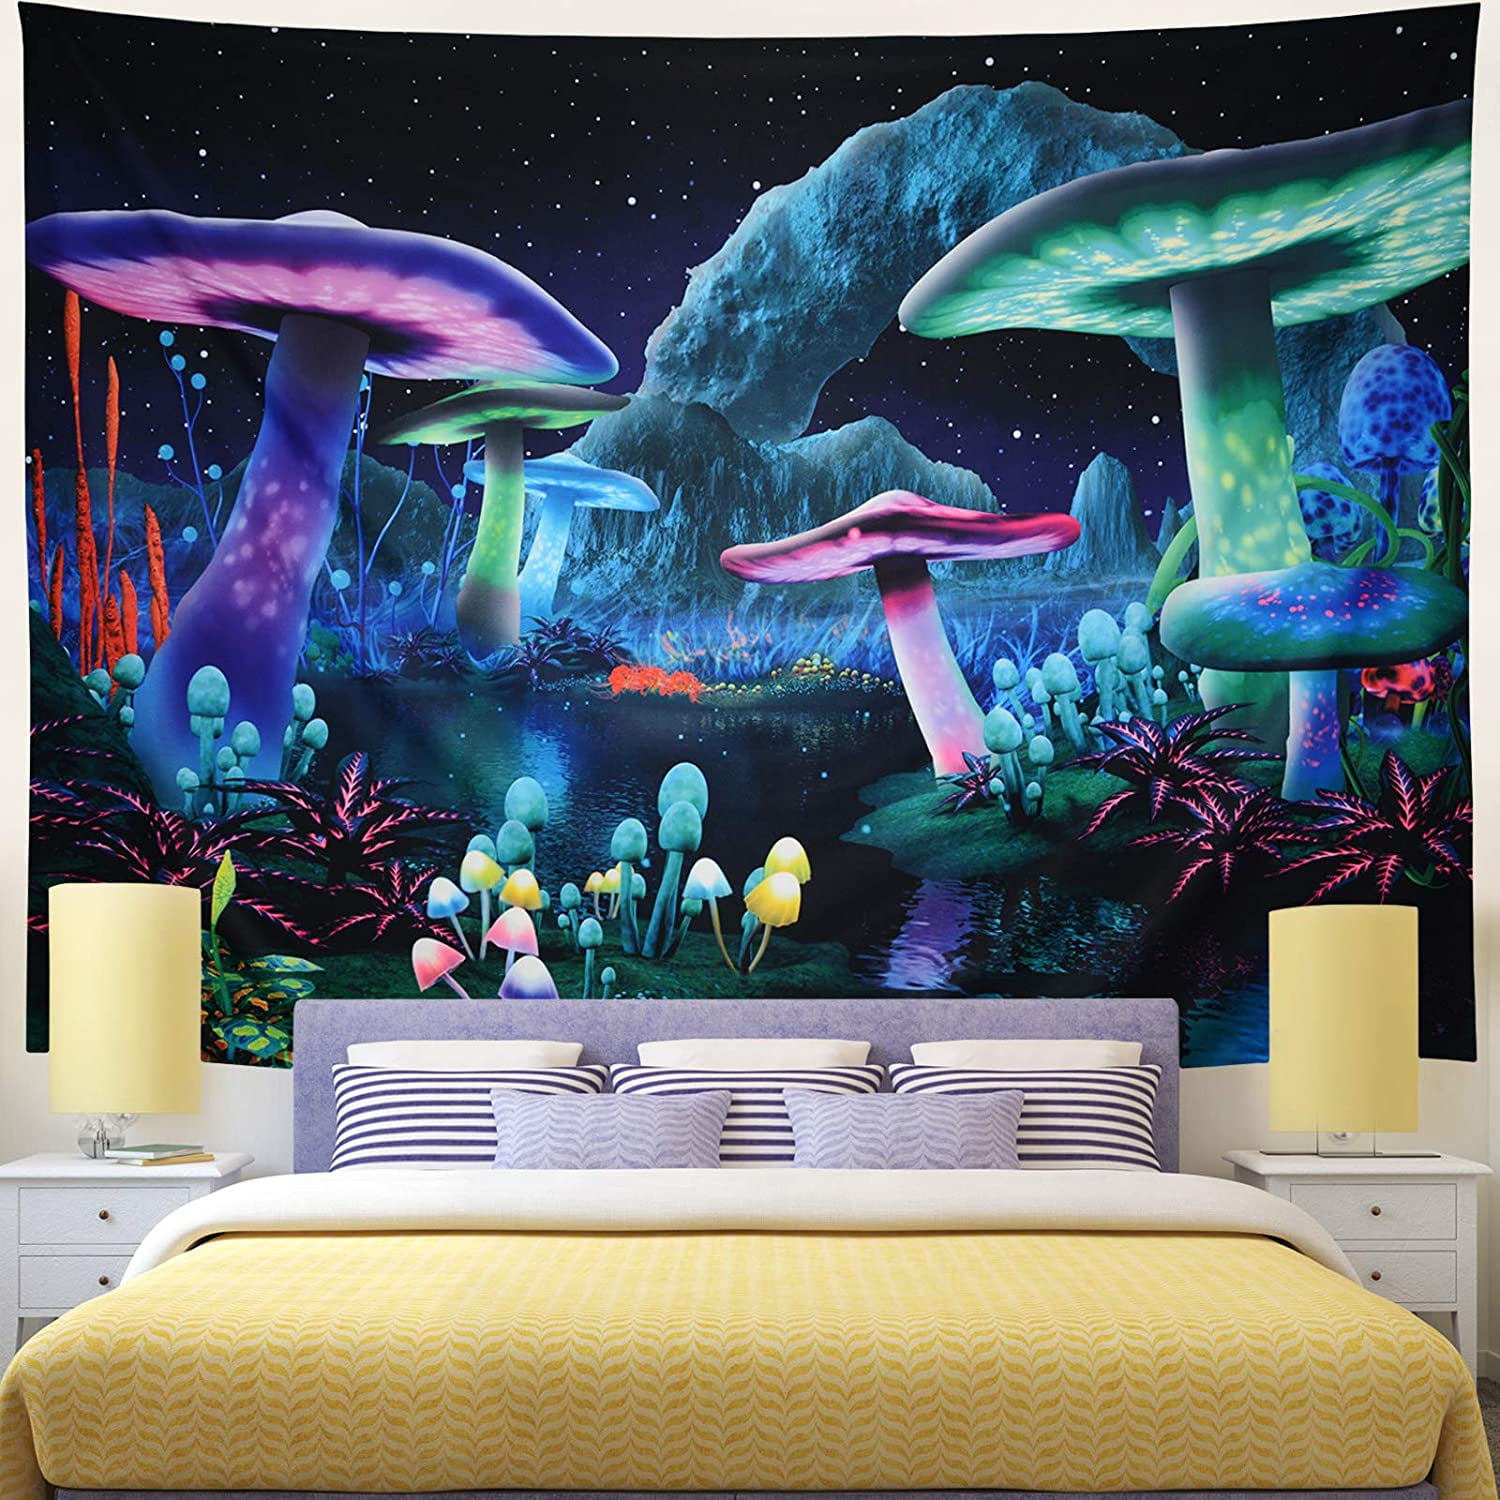 51.2 x 59.1 inches Lyacmy Psychedelic Mushroom Tapestry Trippy Poster Tapestry Colorful Ripple Psychedelic Tapestries Wall Hanging for Room 